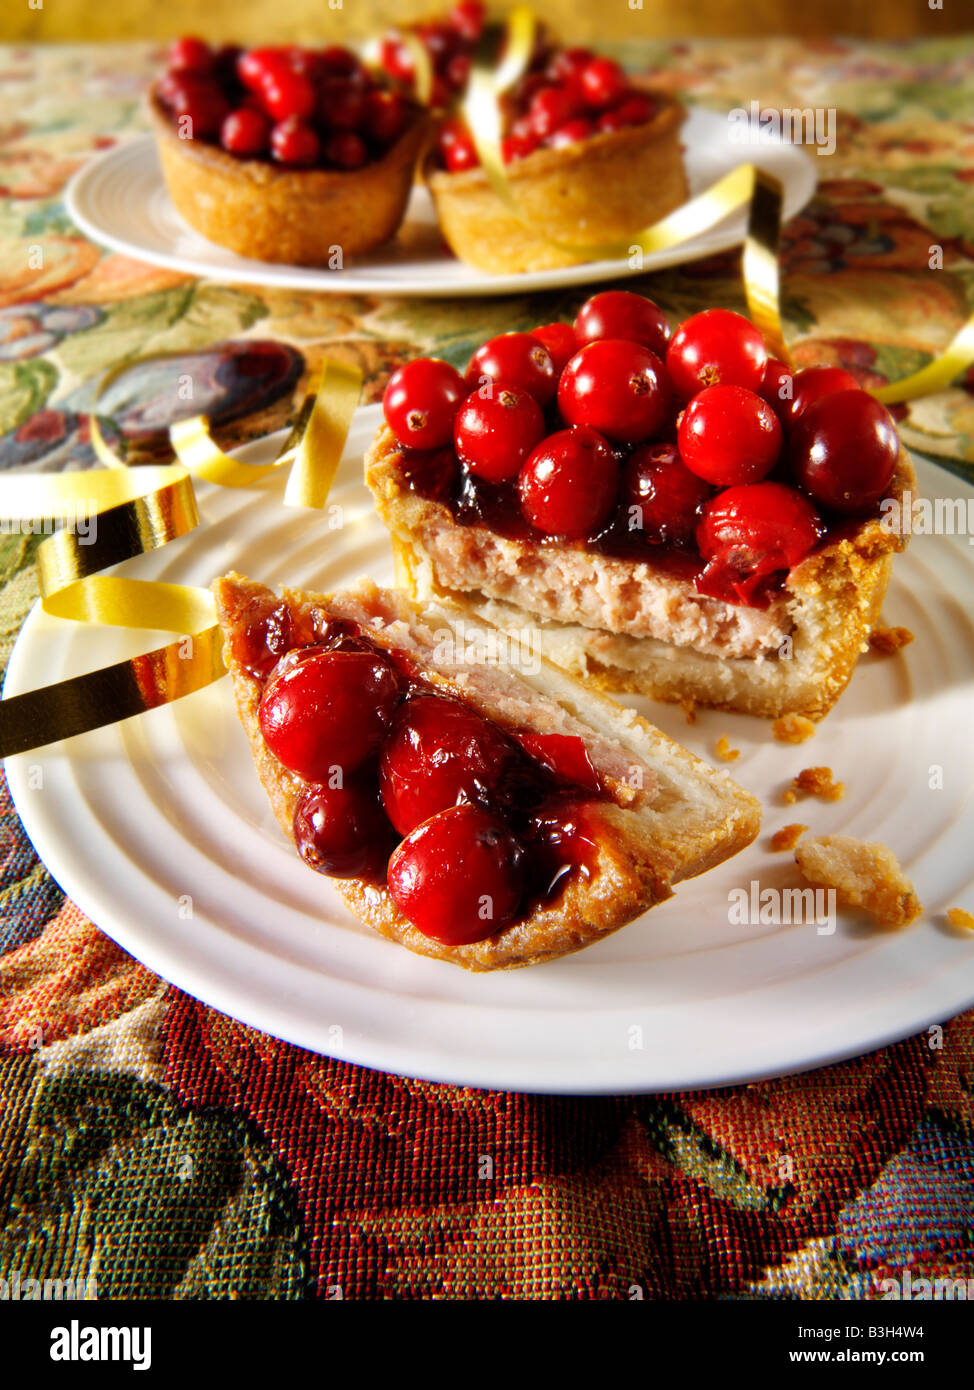 Cranberry topped pork pie - traditional British Christmas winter food Stock Photo